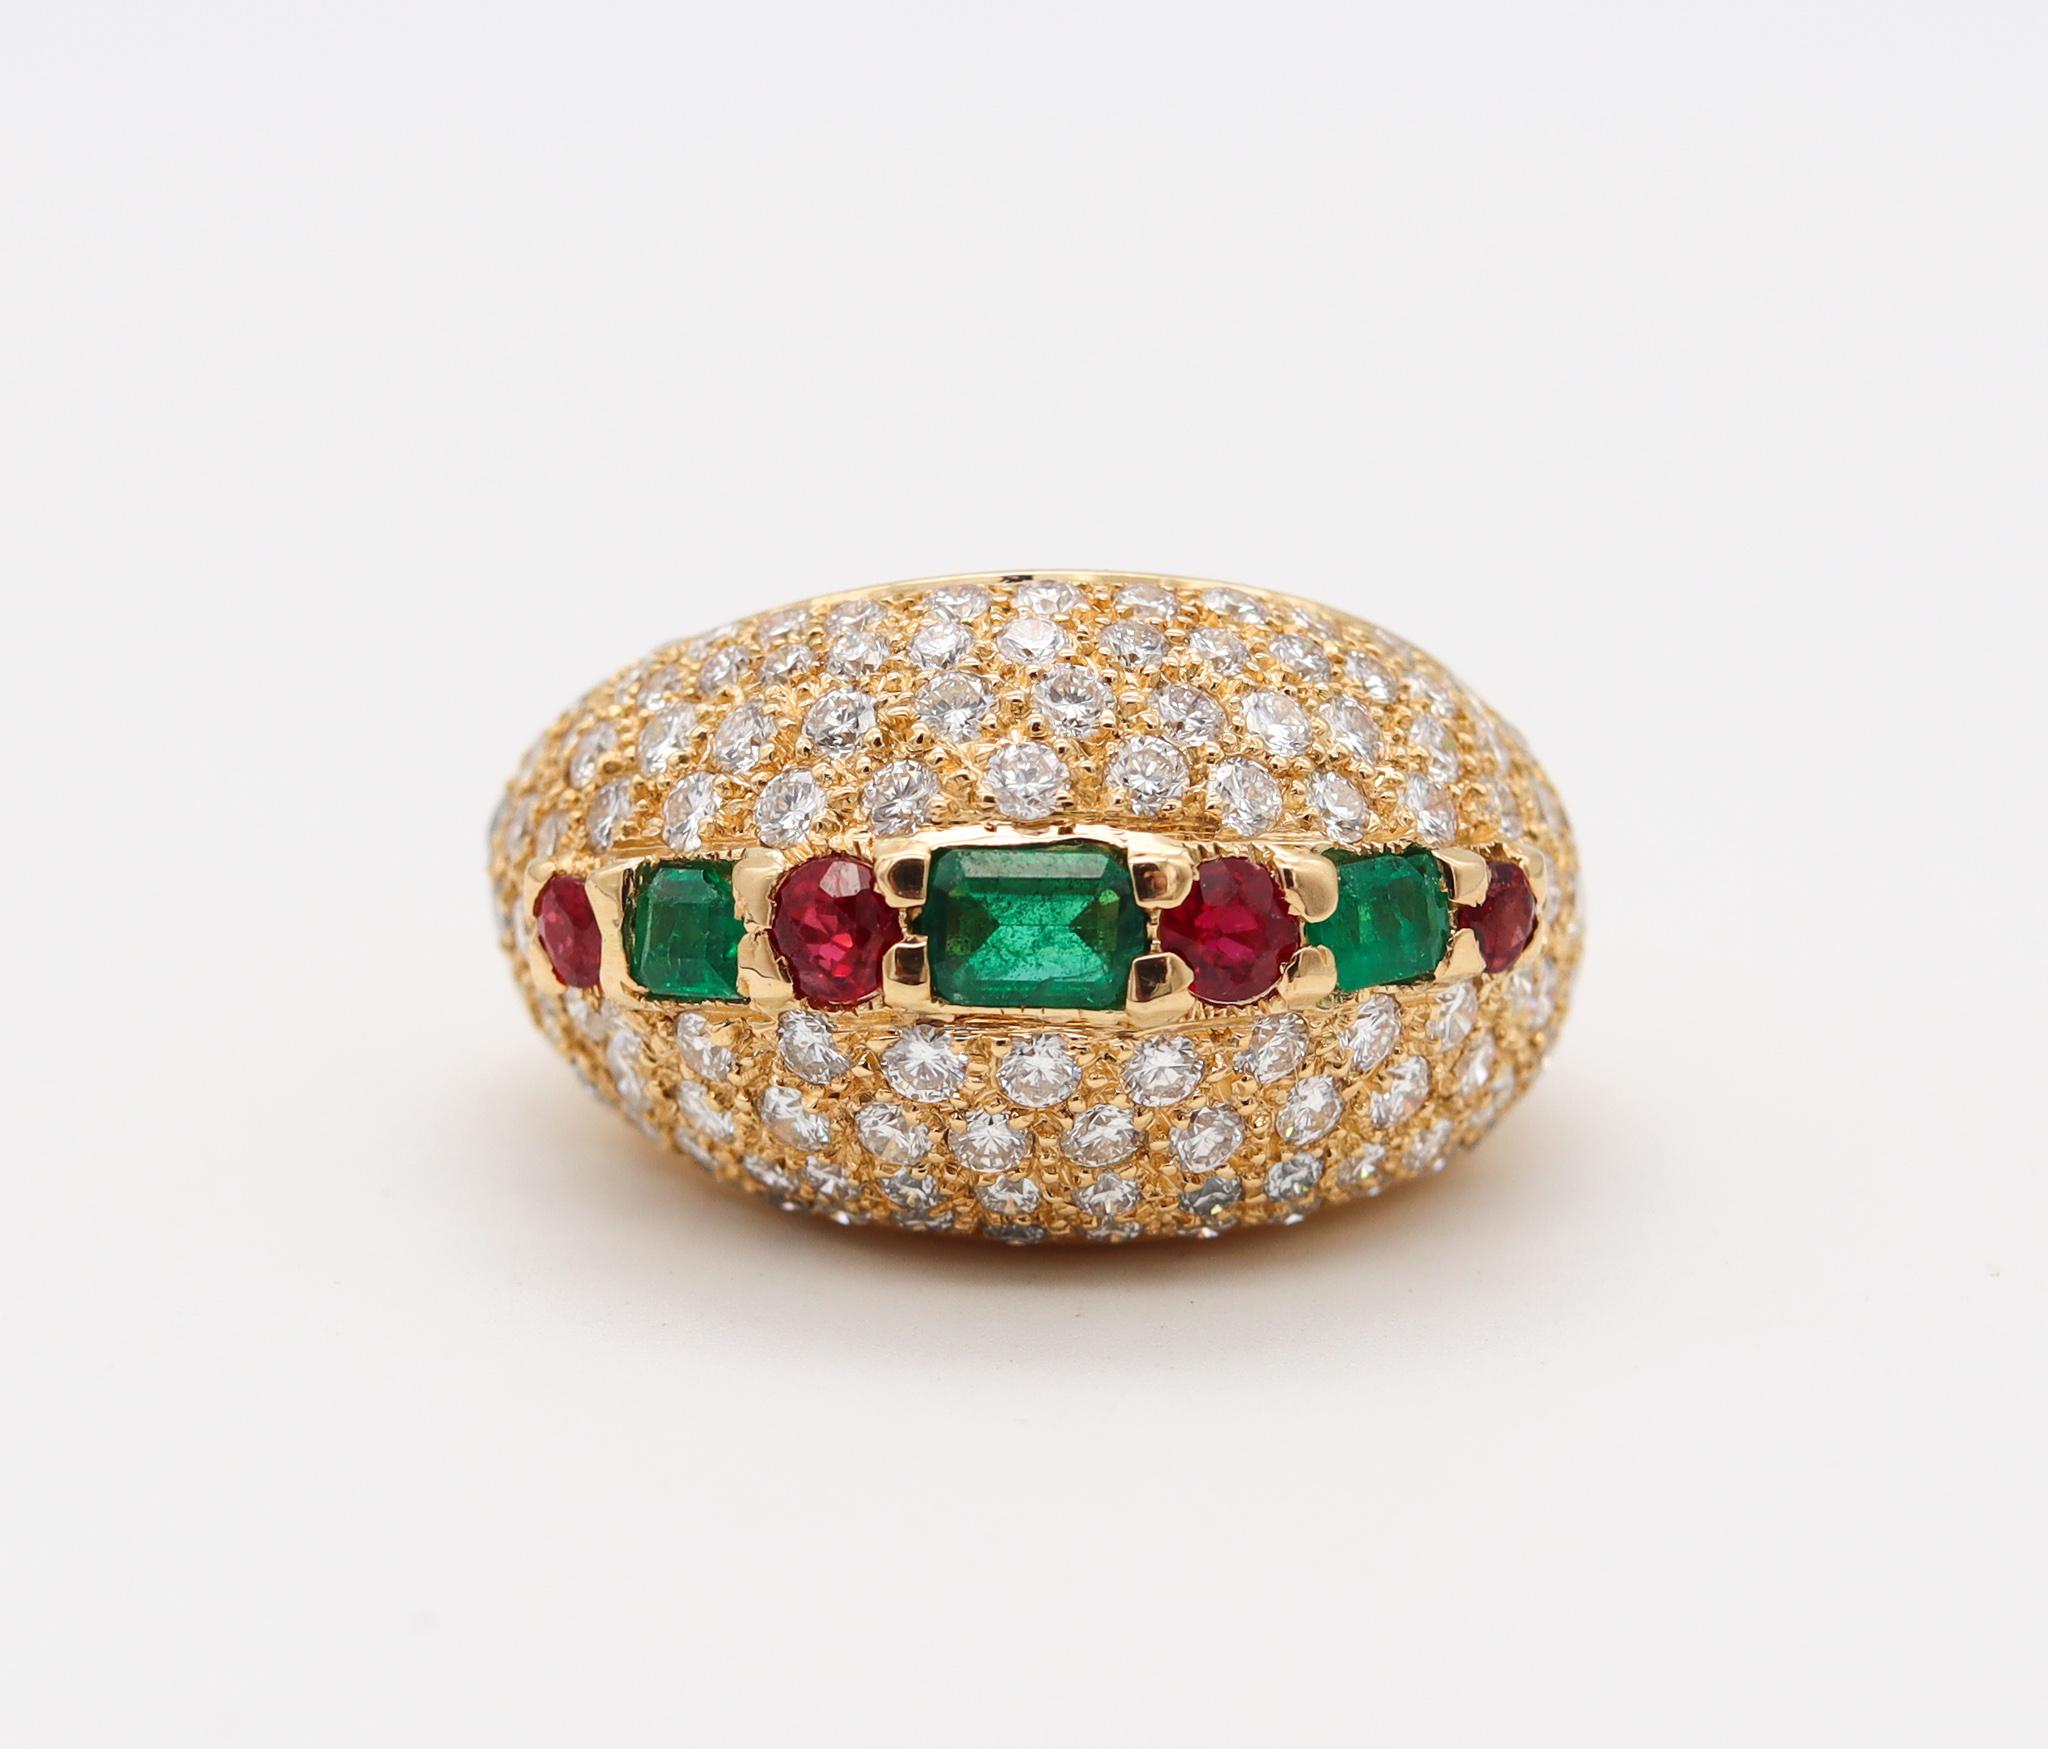 French Modern Cocktail Ring in 18Kt Gold with 7.32 Cts Diamonds Emerald Rubies 3